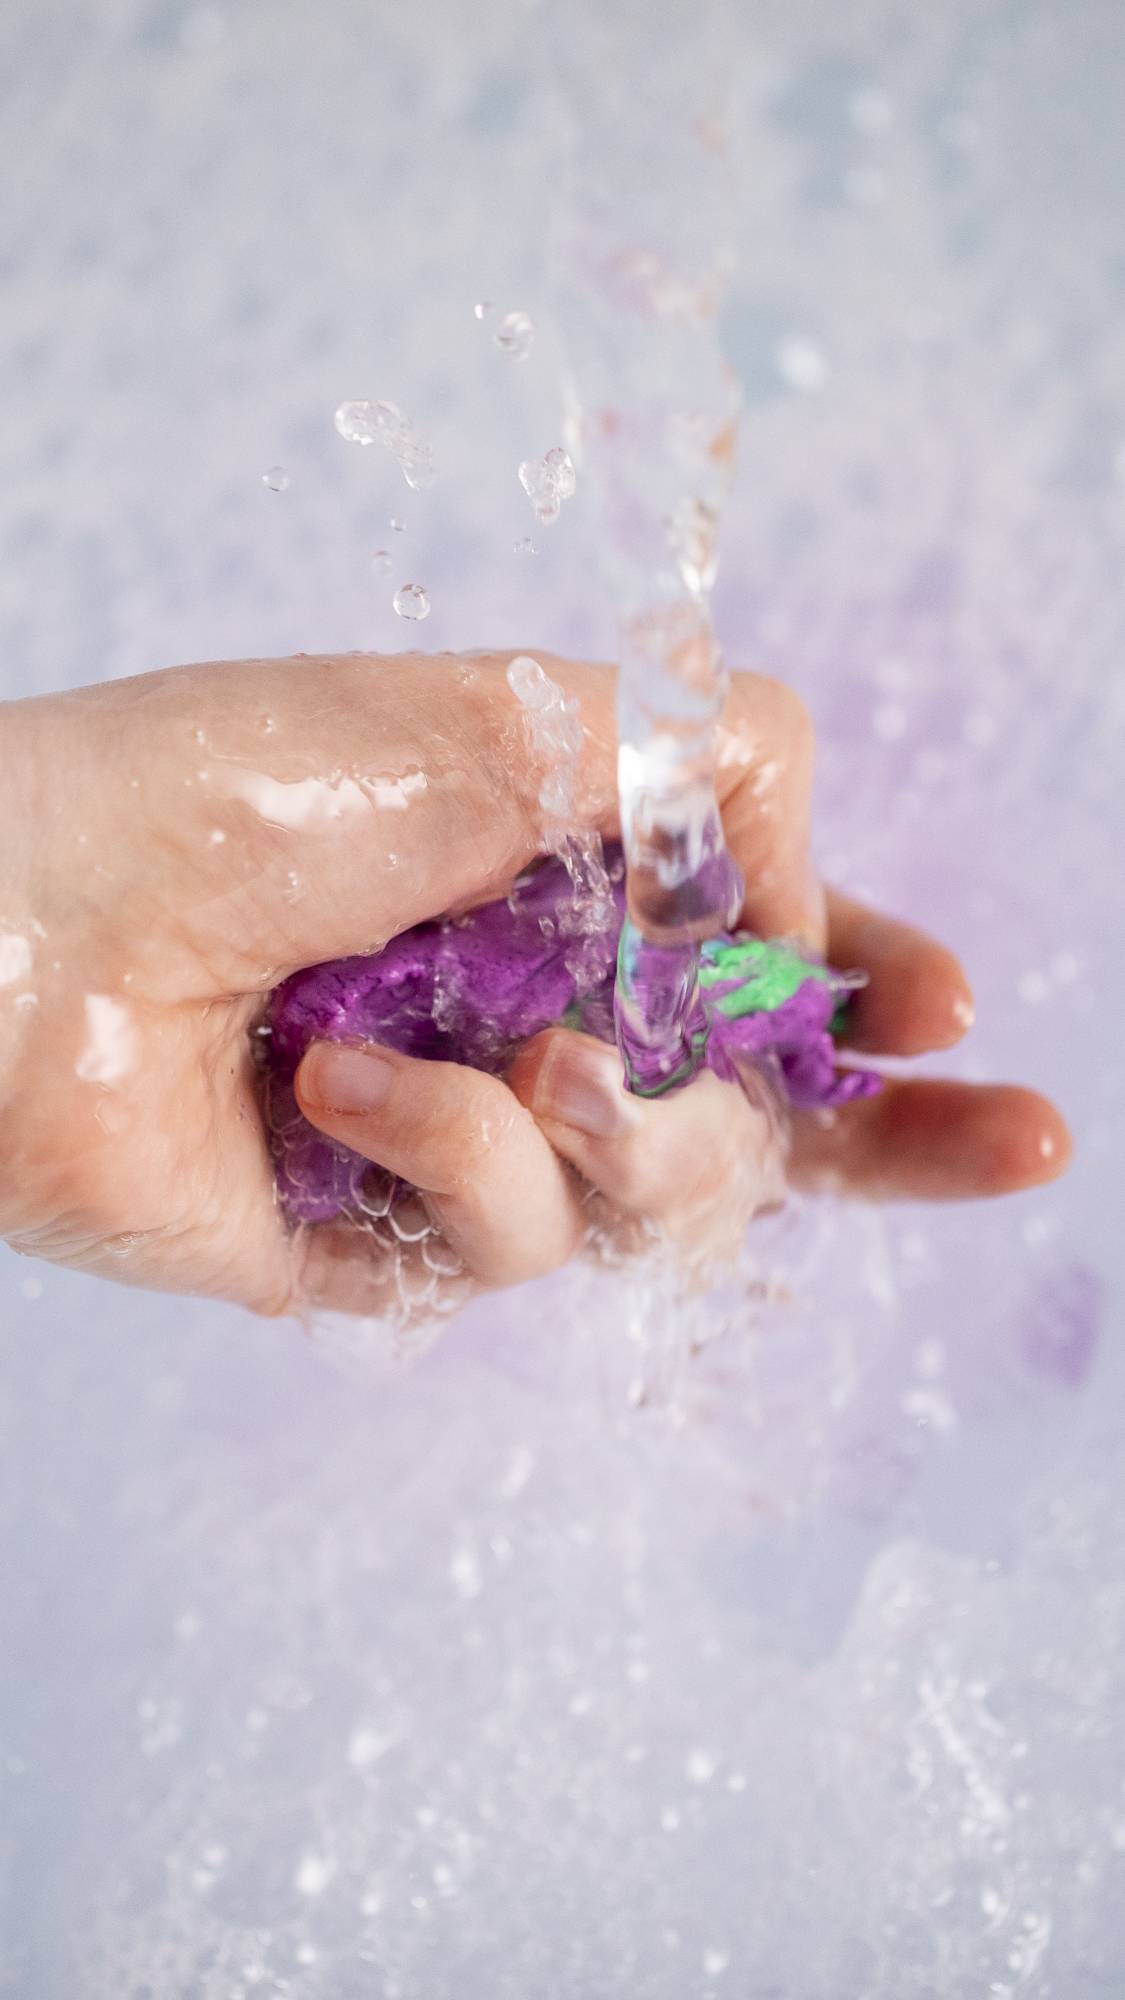 The image shows a close-up of the model's hand as they are squeezing and crumbling the product under running water to create bouncy bubbles below. 